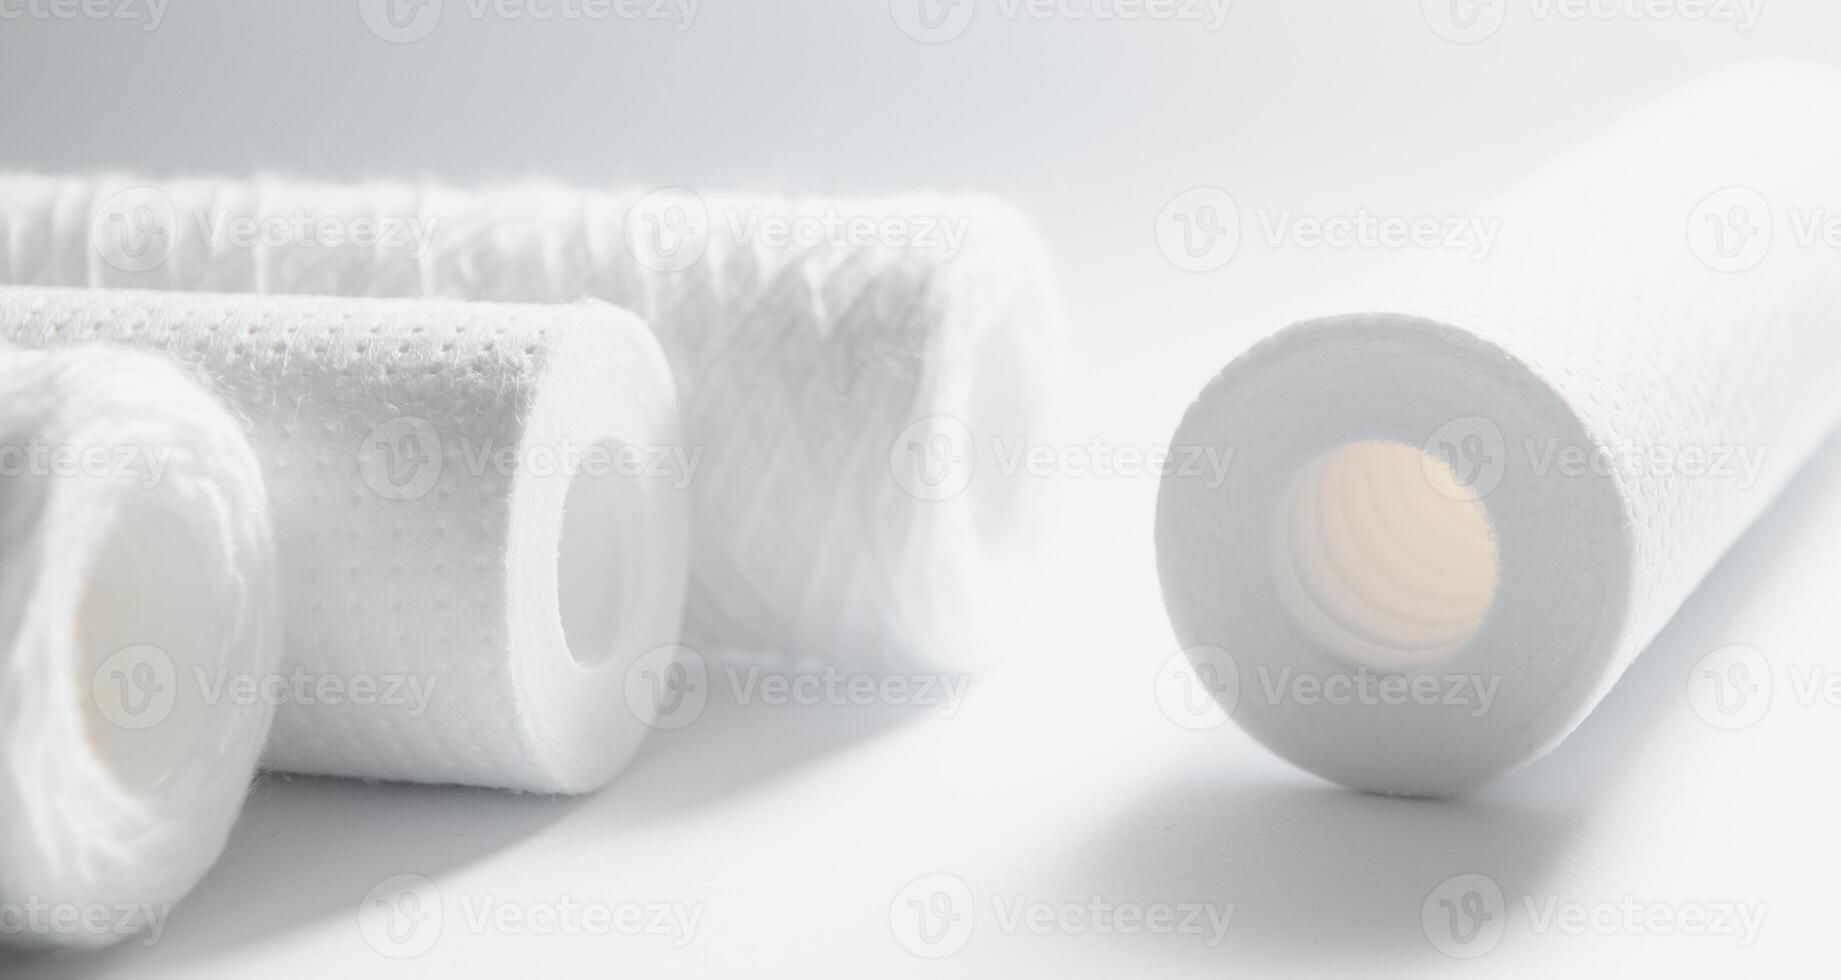 Cartridges for water treatment systems on white background. photo